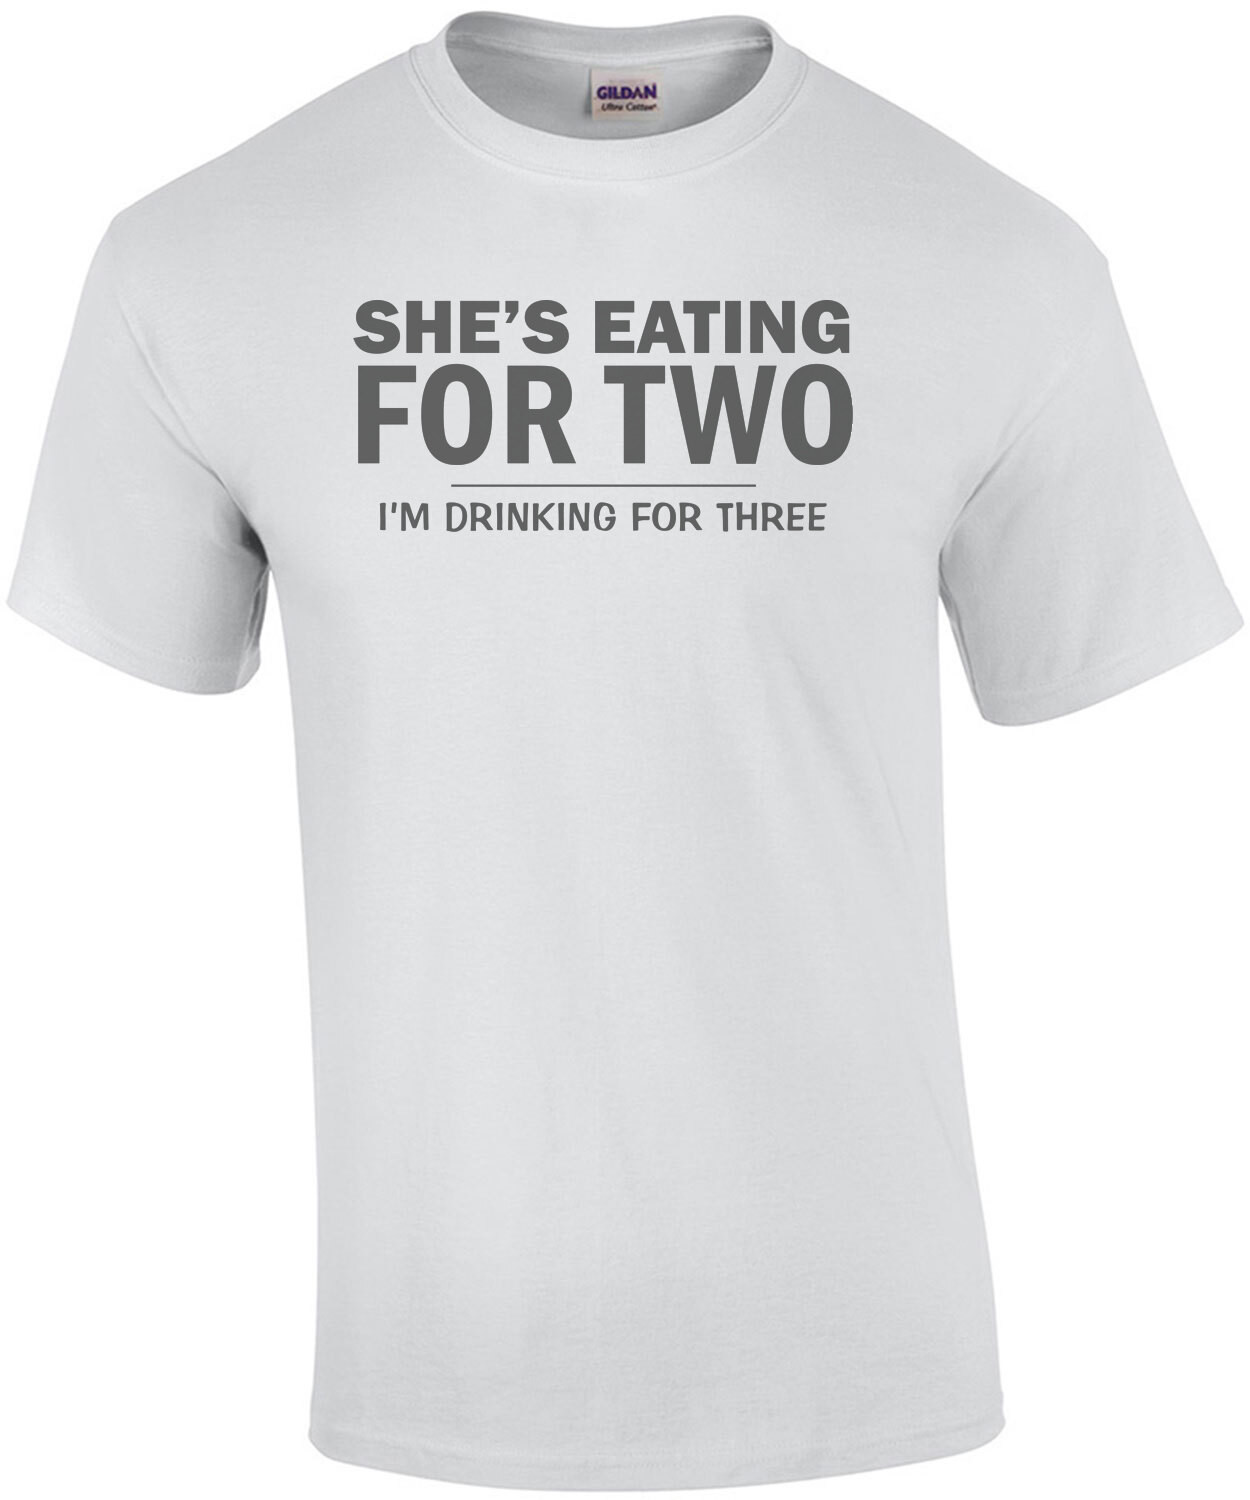 She's Eating For Two, I'm Drinking for Three Funny Pregnancy Shirt For Men